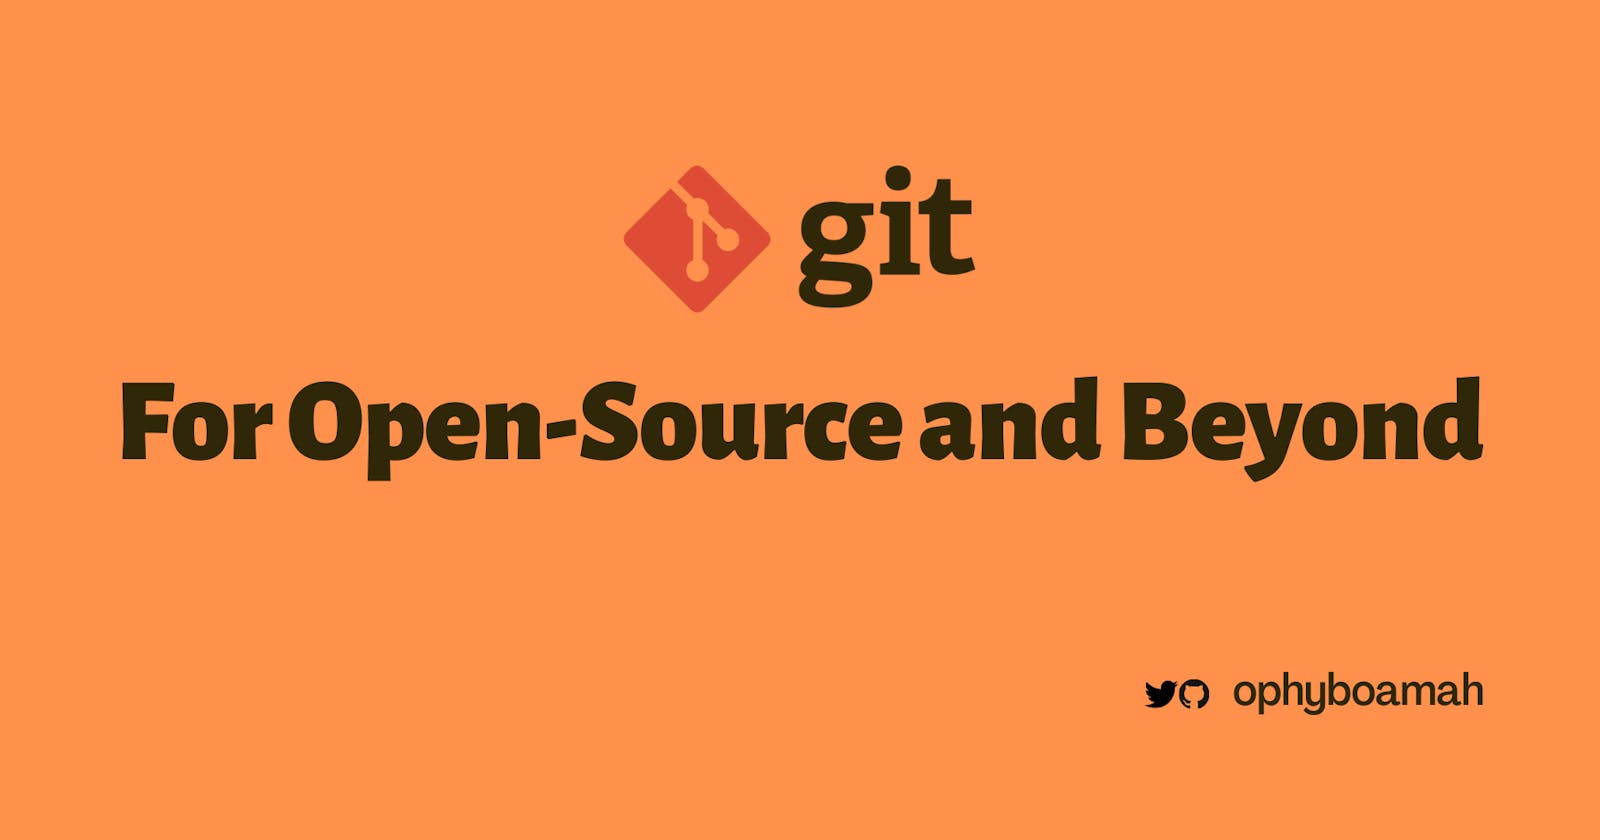 Git: For Open-Source and Beyond